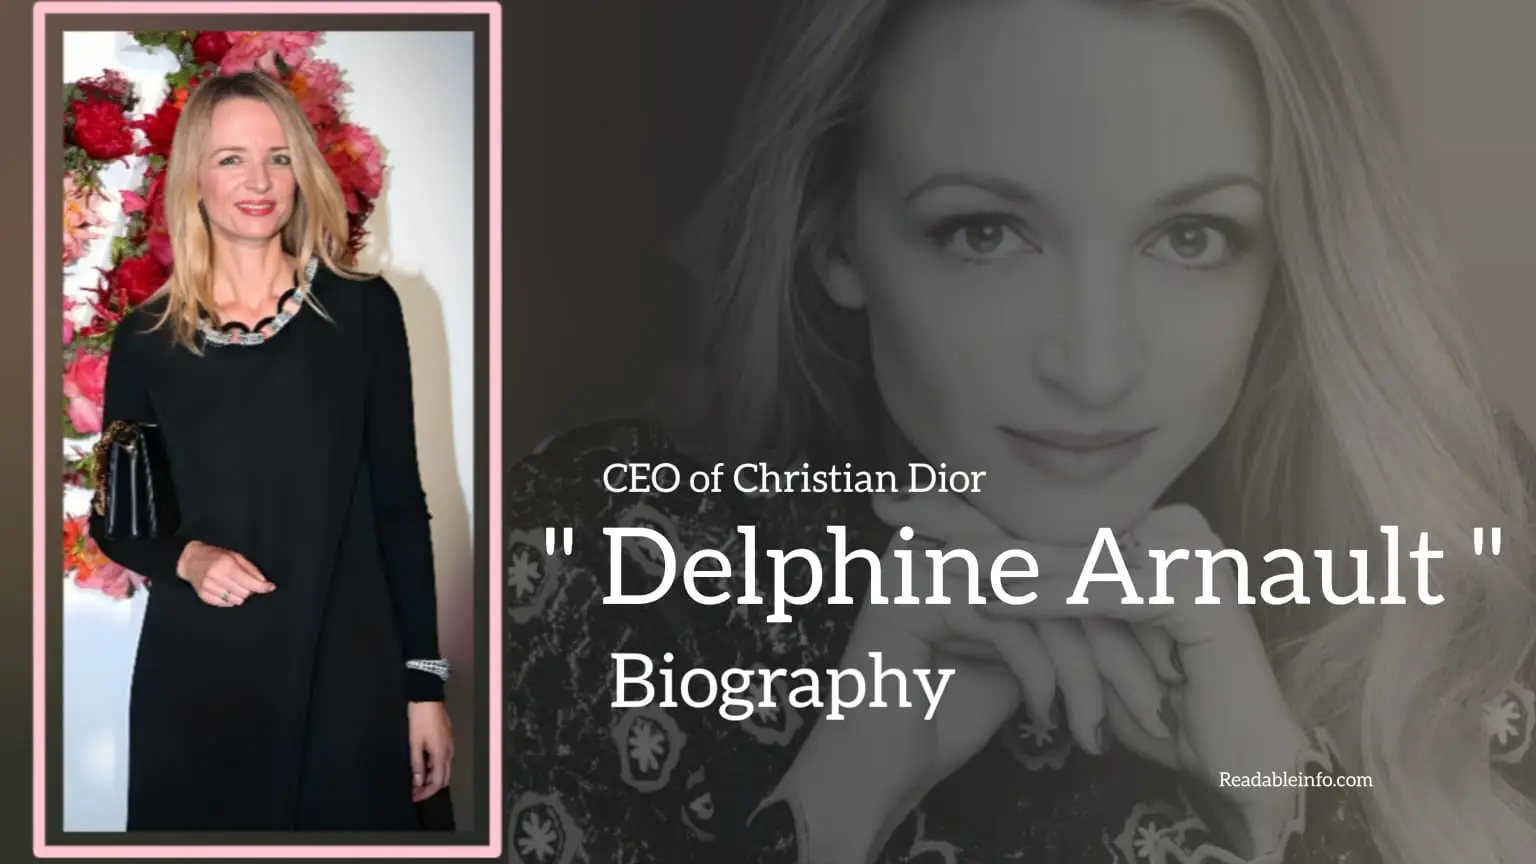 You are currently viewing Delphine Arnault Biography (CEO of Christian Dior)